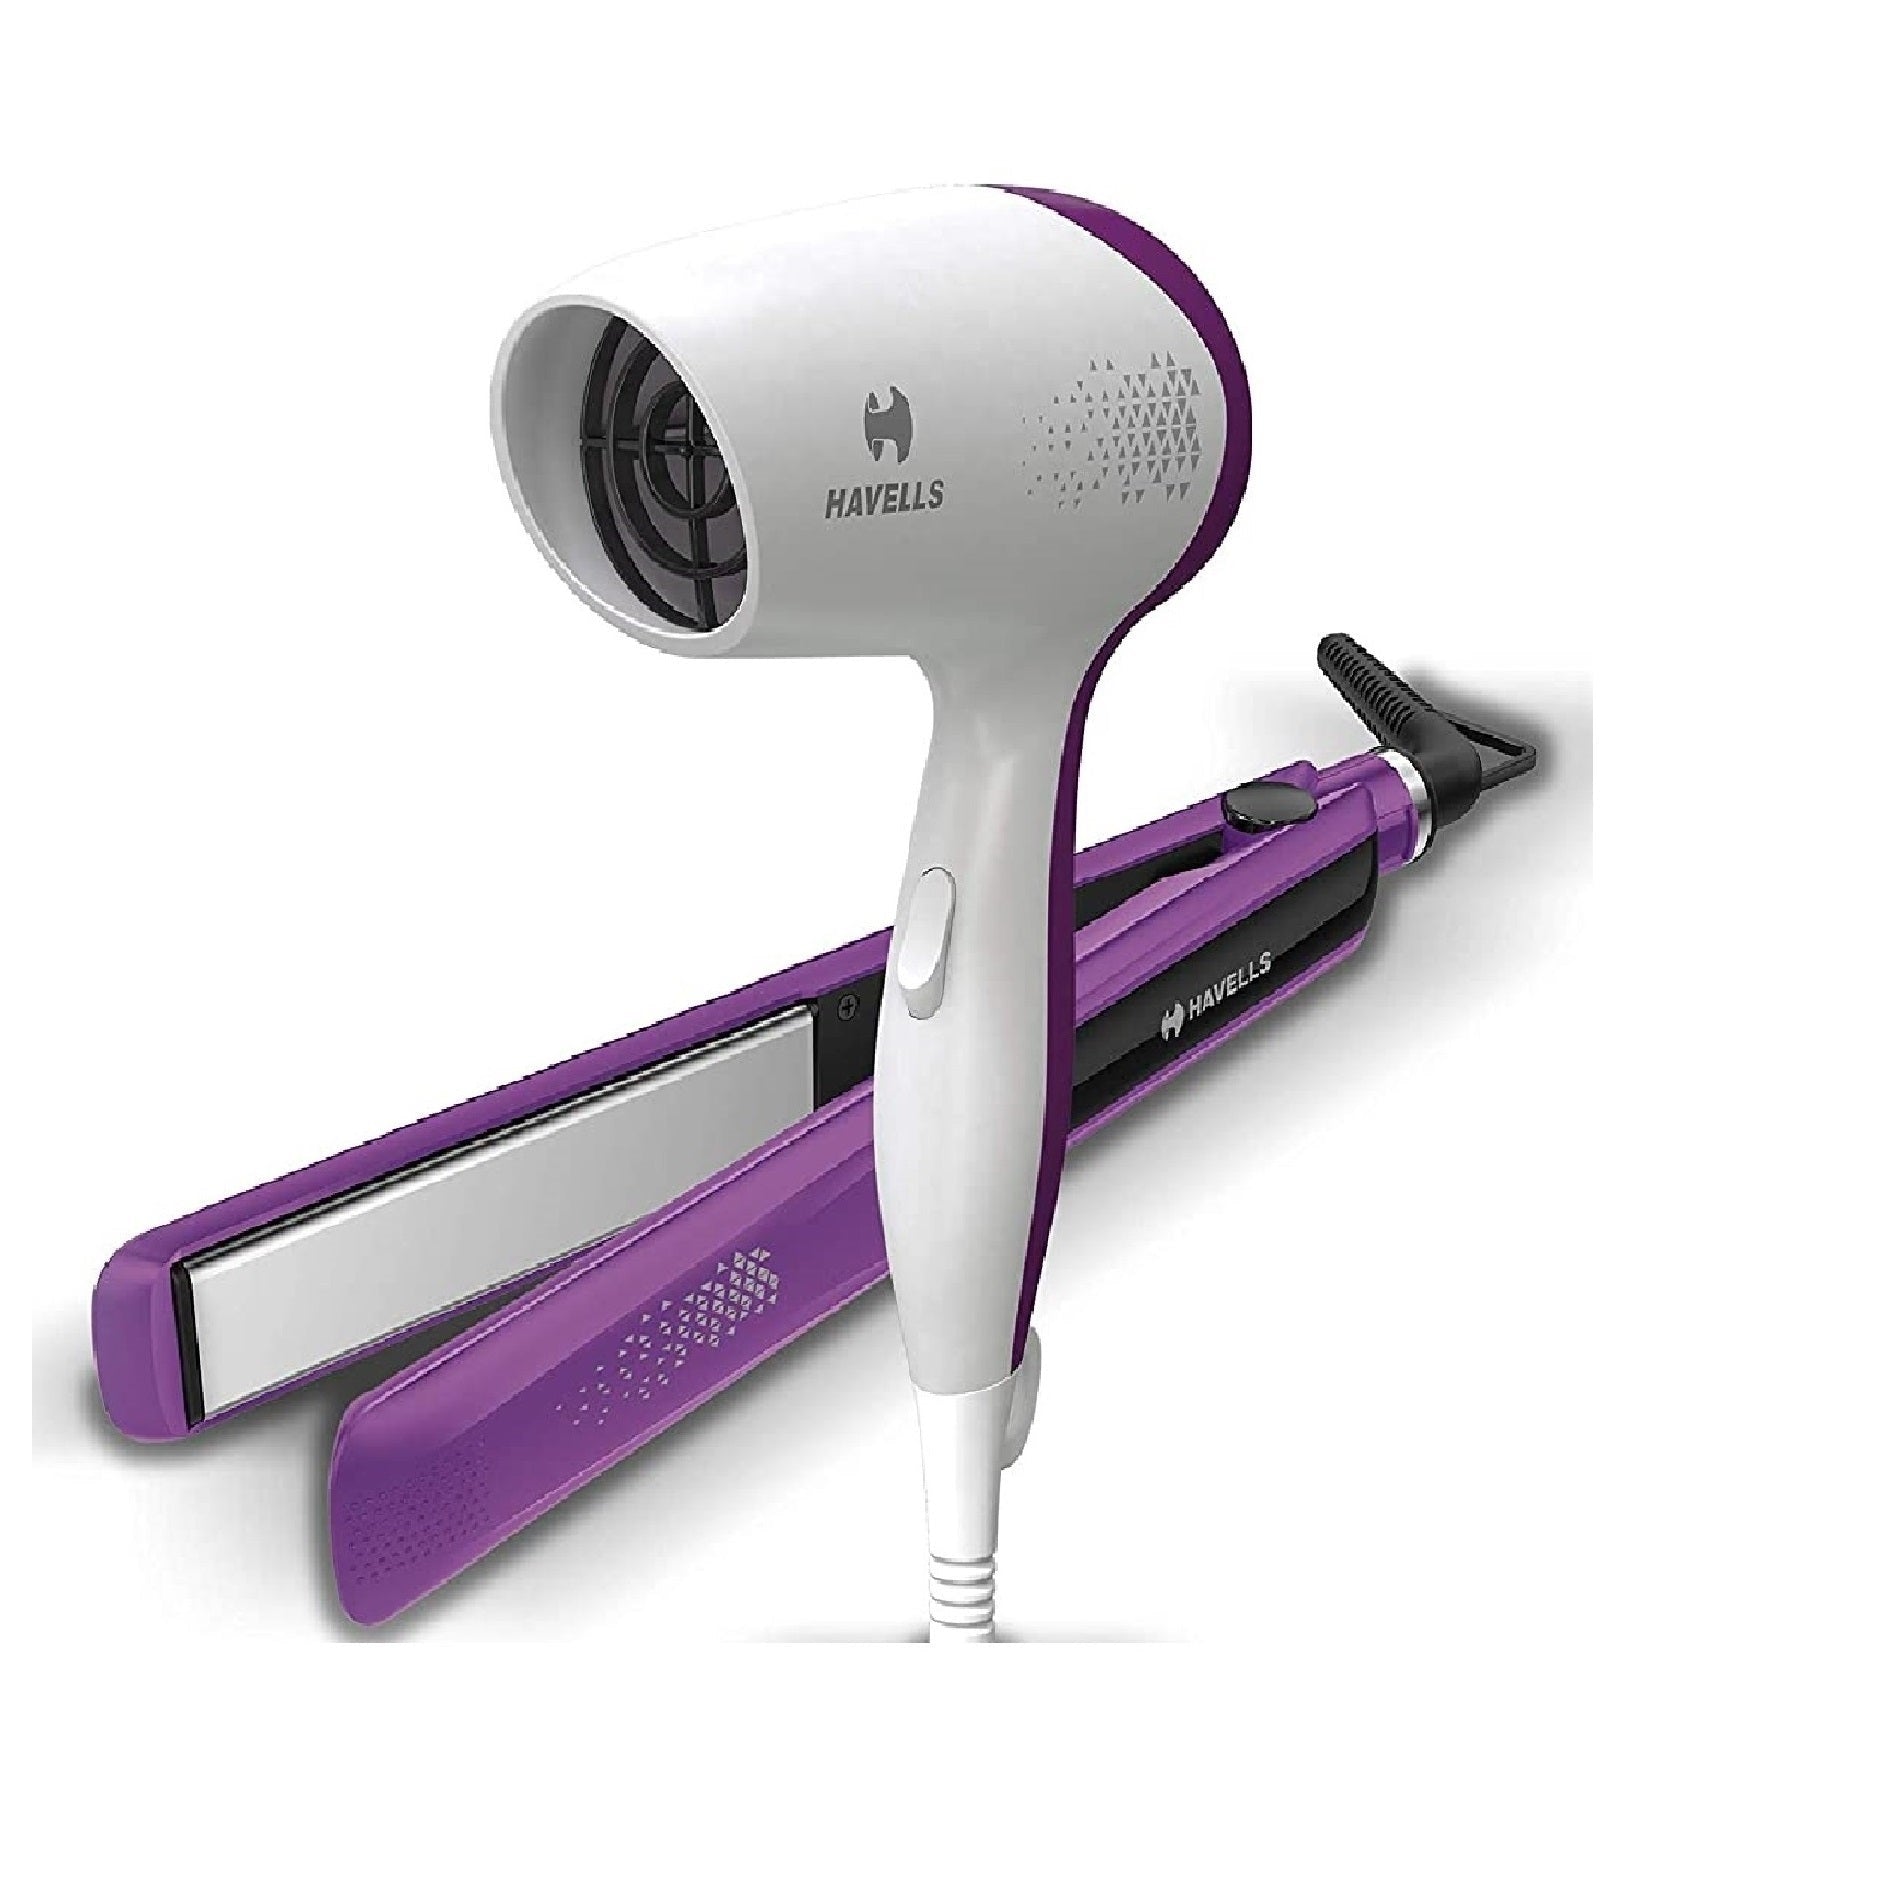 Havells HC4025 Limited Edition Styling Pack Combo (1200 Watts Dryer + Straightener)